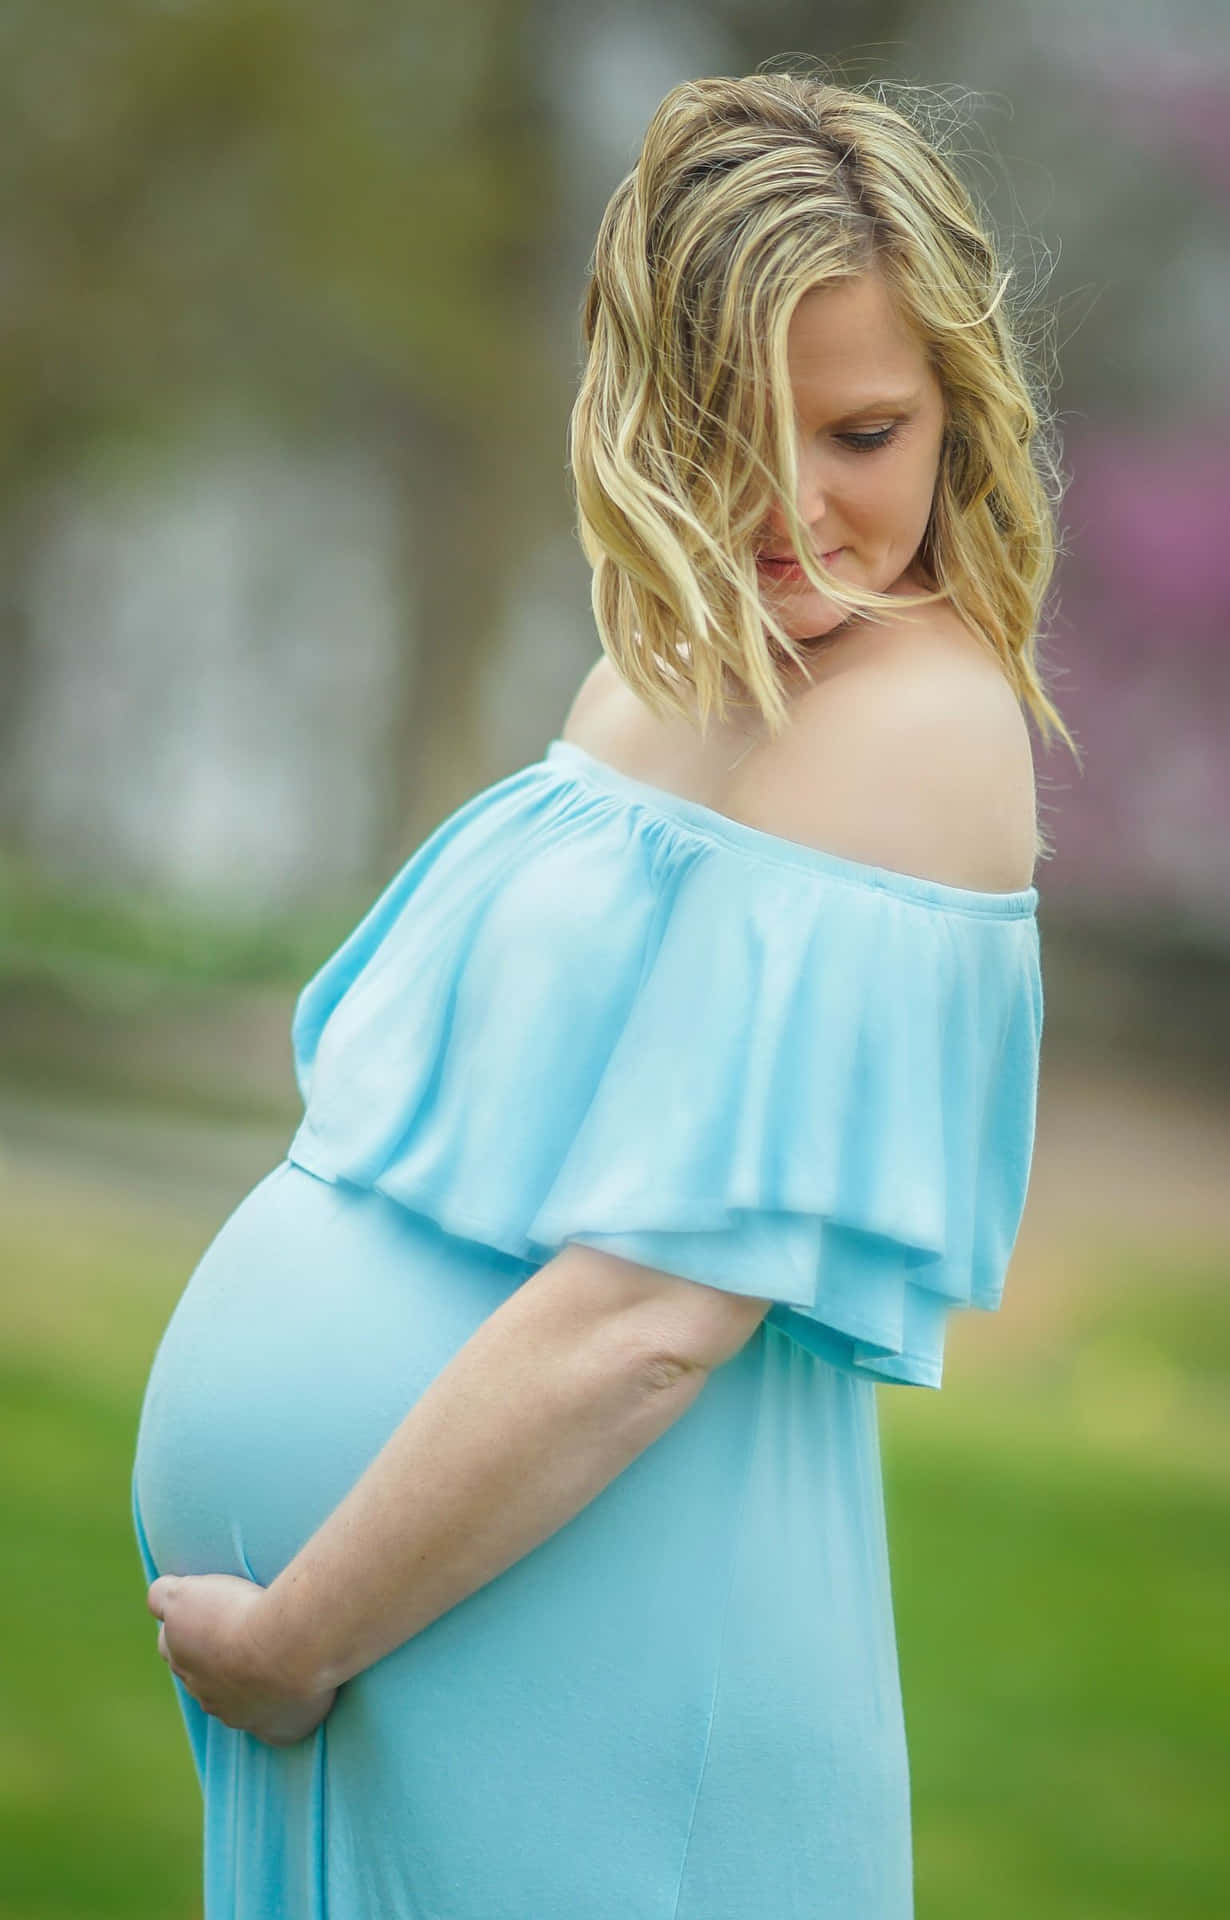 A Pregnant Woman In A Blue Dress Is Posing For A Photo